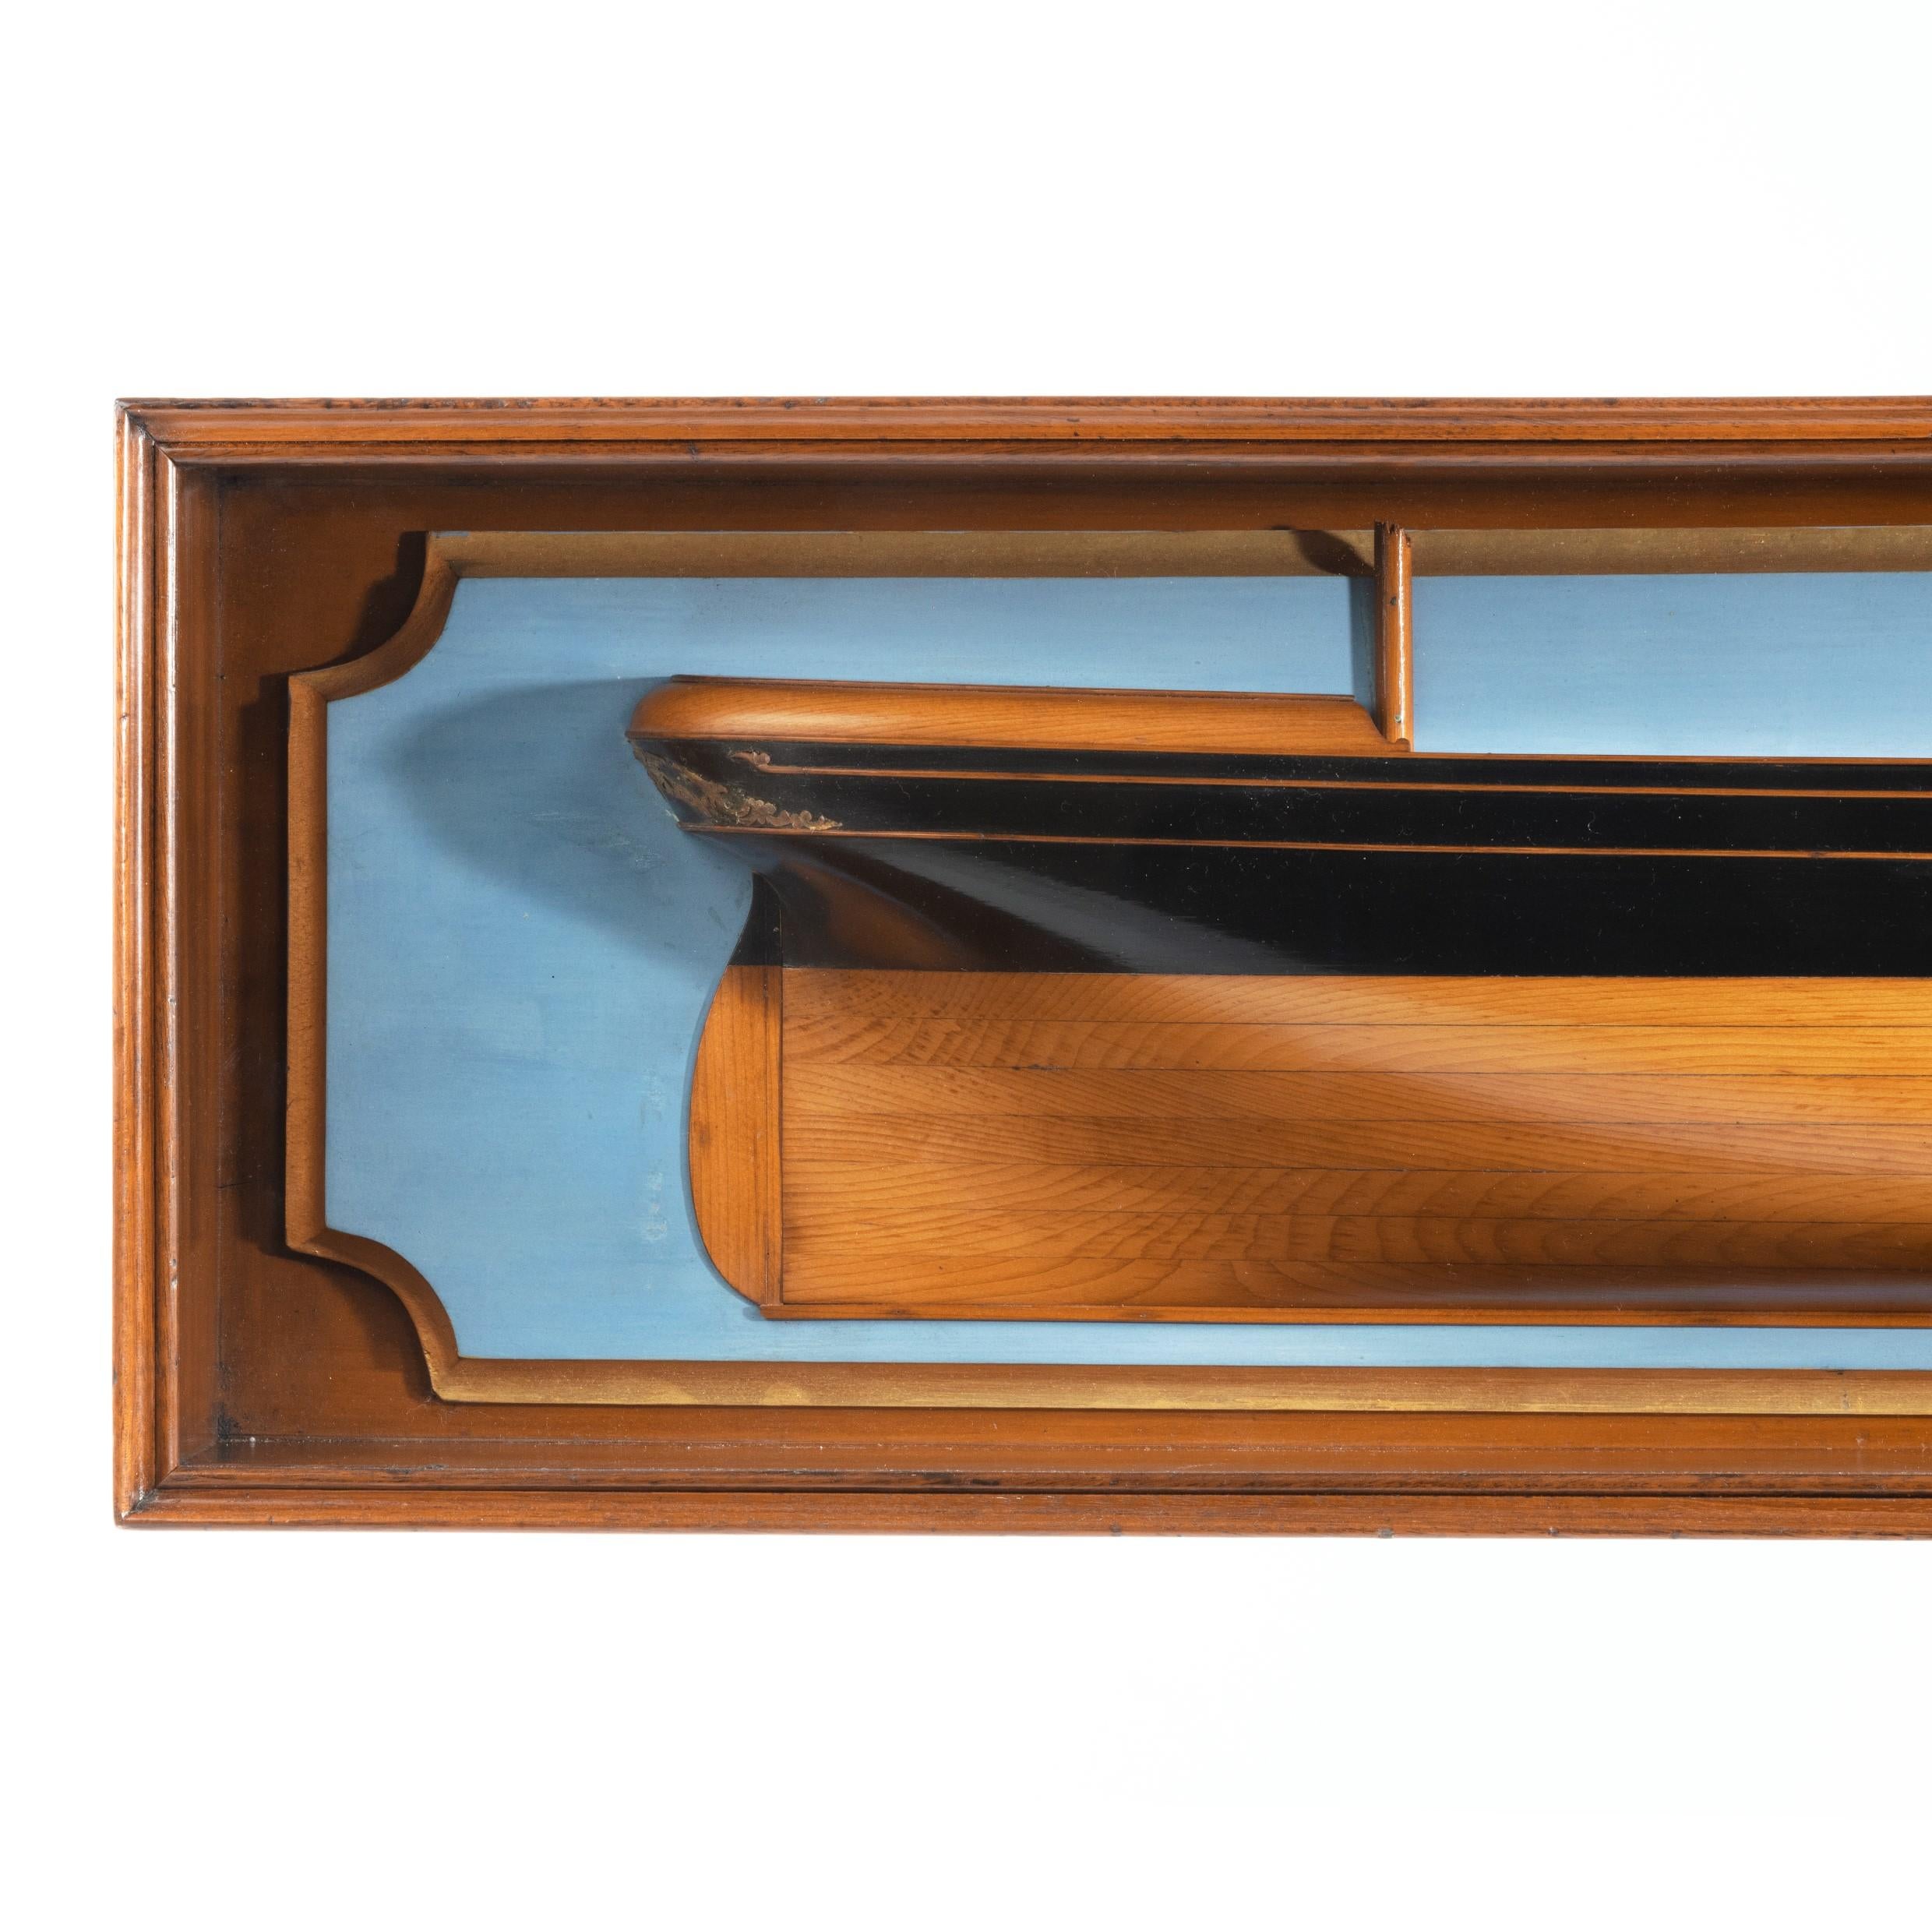 A Victorian cased half hull of a three masted sailing ship, shown with boxwood planking below the original black painted topsides, applied with gilt scrolling decoration to bow and stern, set on a shaped gilt and pale blue backboard, within a glazed